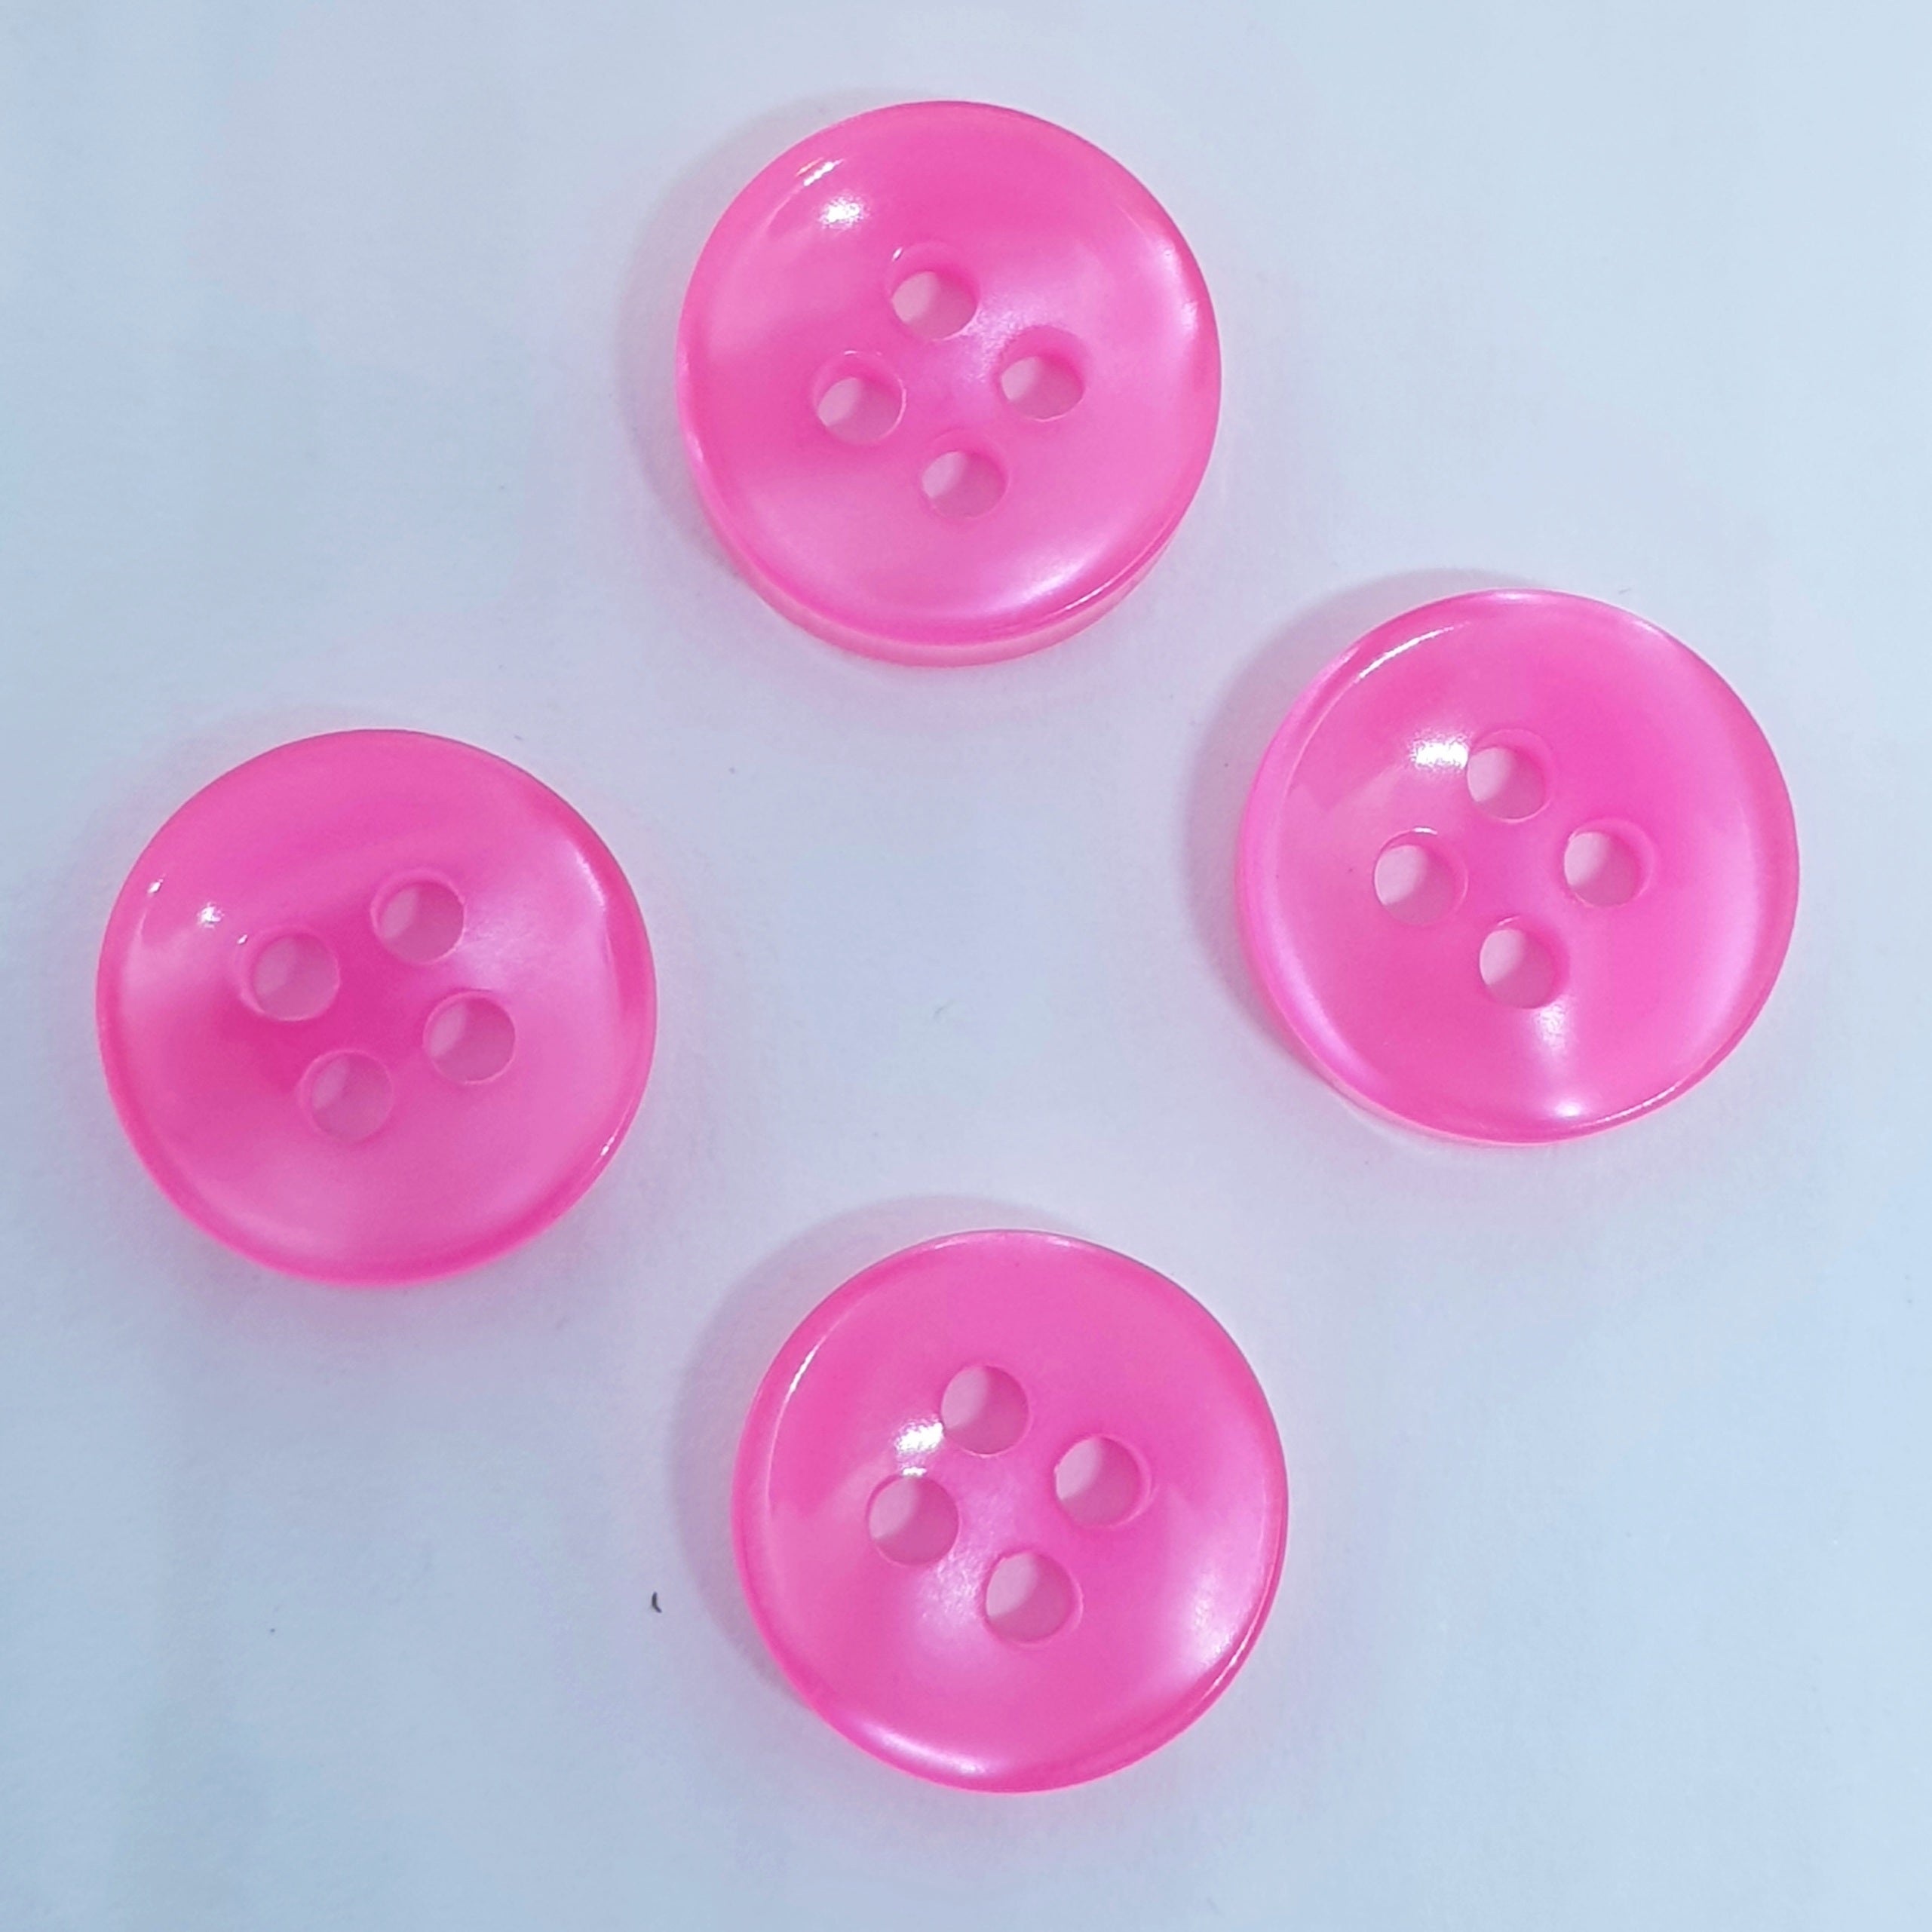 MajorCrafts 80pcs 11.5mm Bright Pink Pearlescent 4 Holes High-Grade Round Resin Small Sewing Buttons